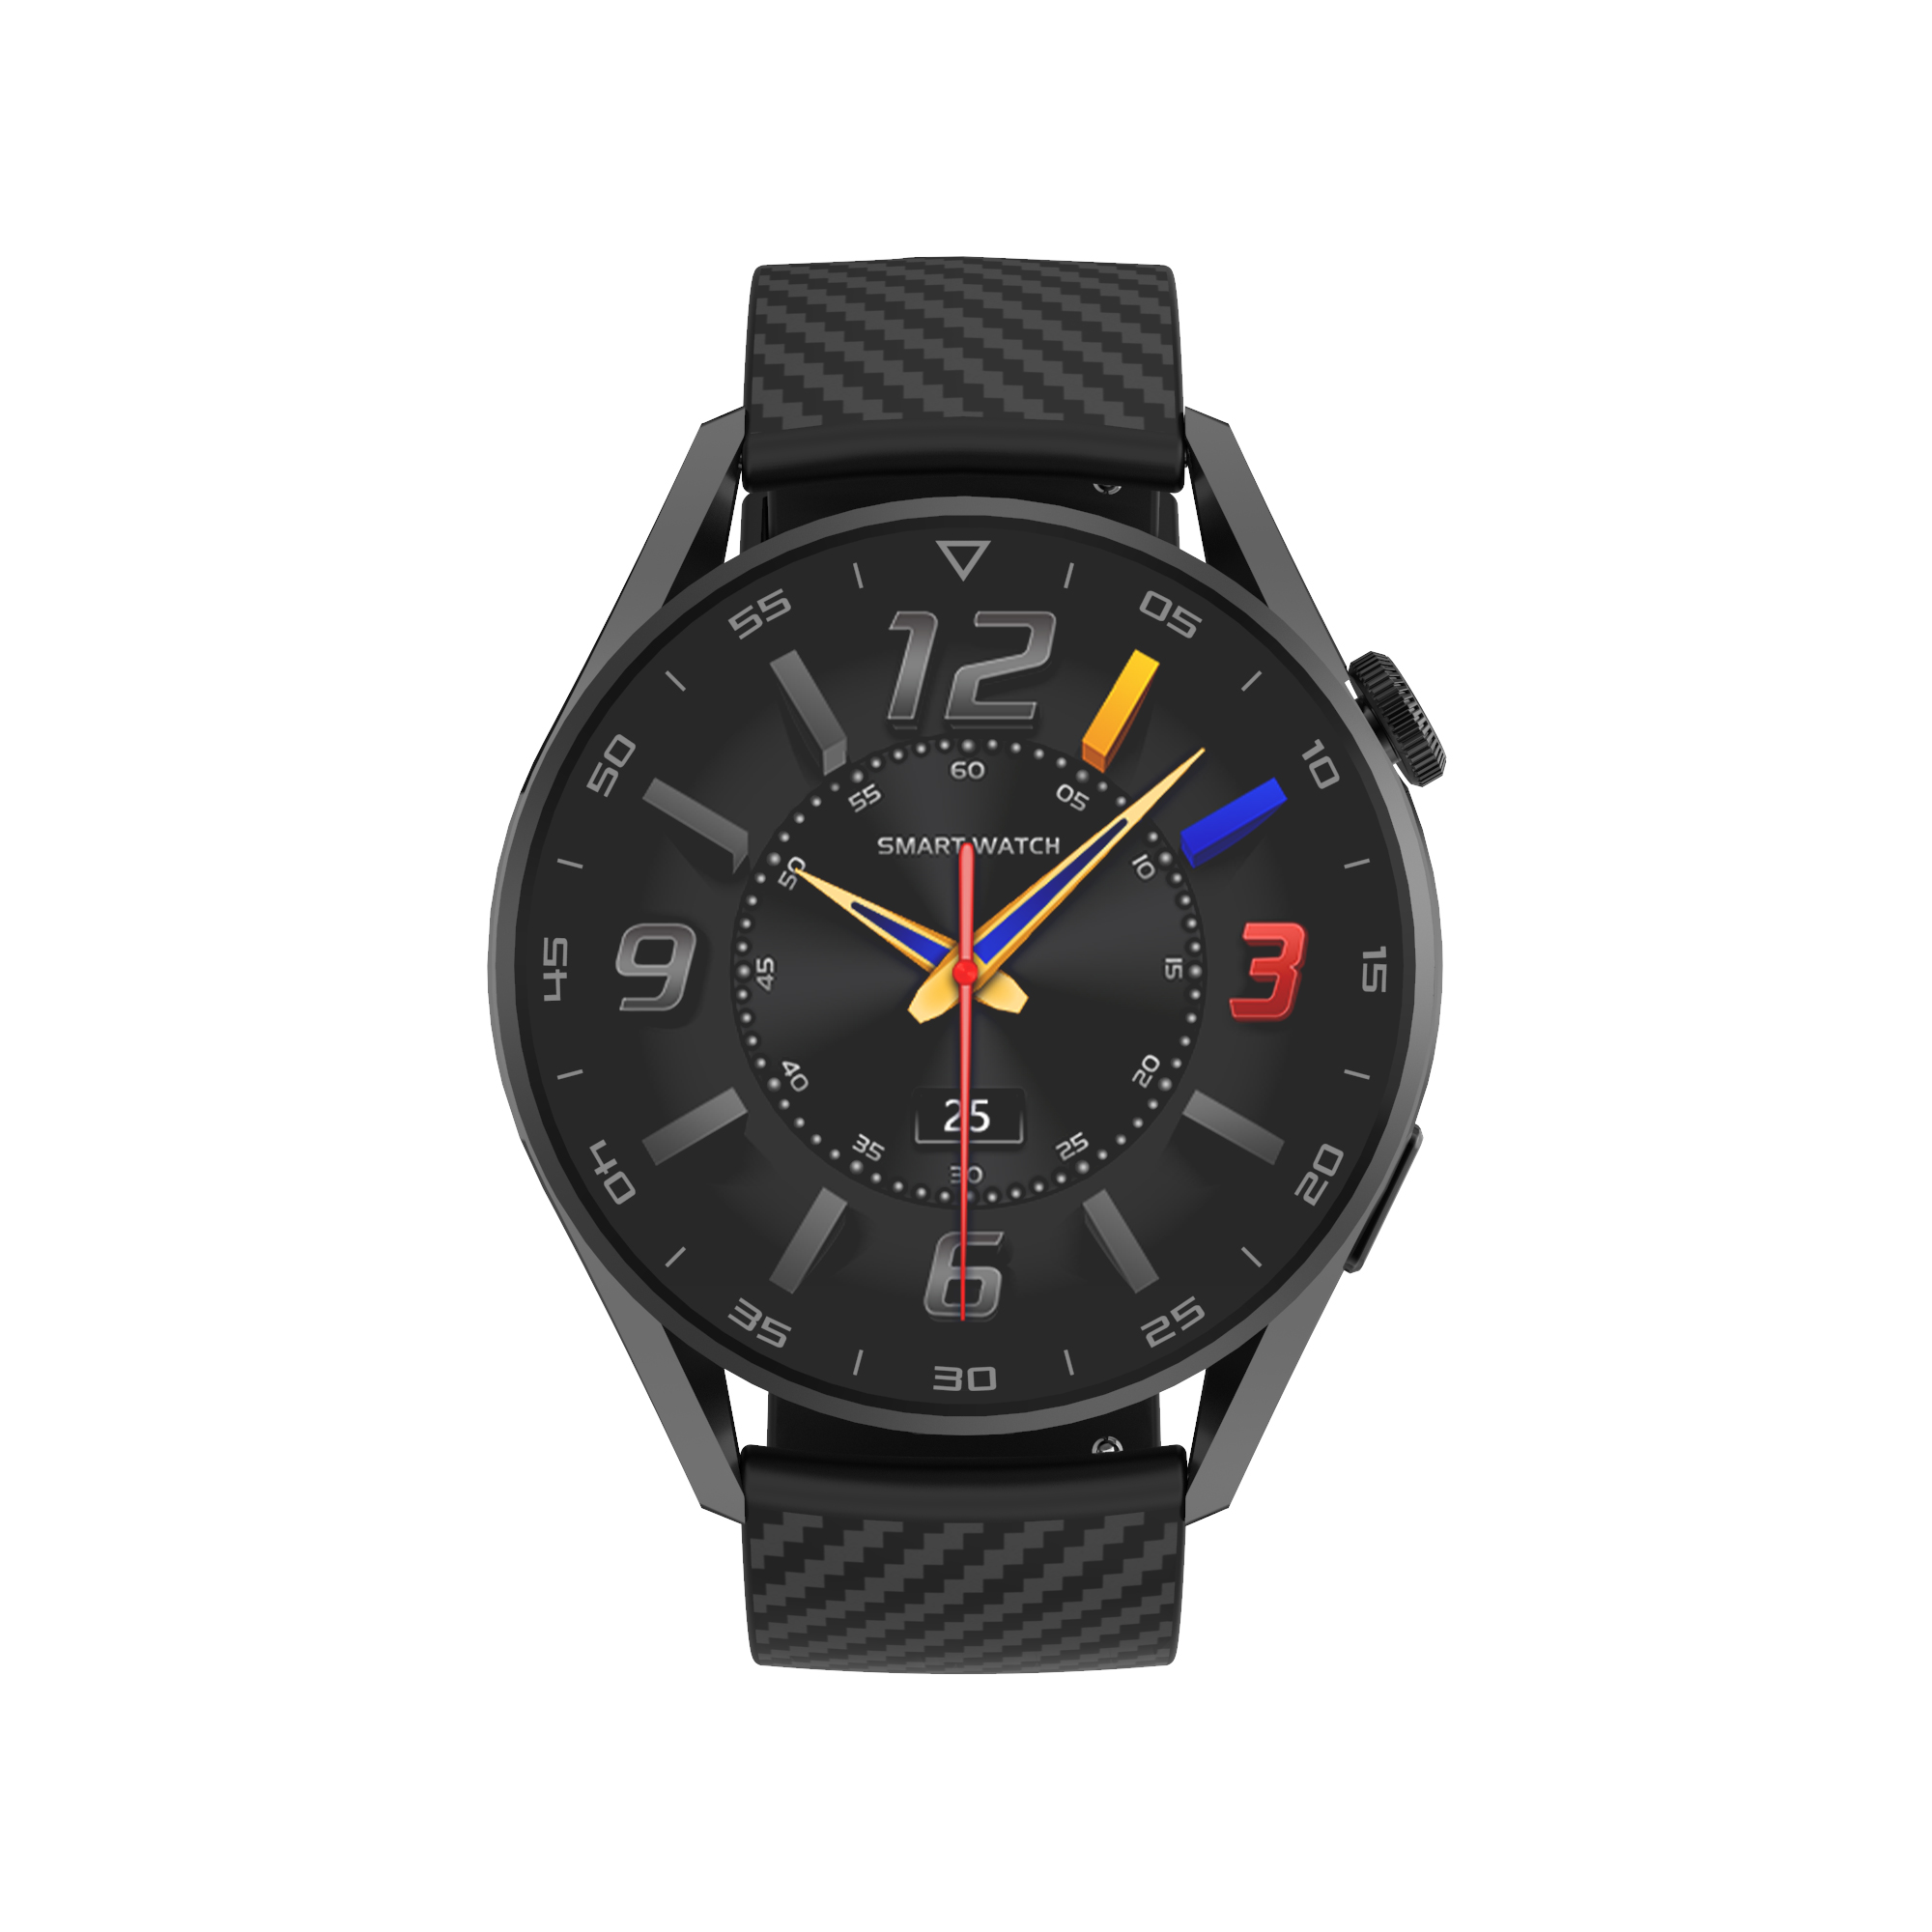 Find DT NO 1 DT3 Pro 1 36 inch 390 390 Pixels IPS Full Round Touch Screen BT Calling Heart Rate Monitor 100 Watch Faces IP68 Waterproof BT 5 0 Smart Watch for Sale on Gipsybee.com with cryptocurrencies